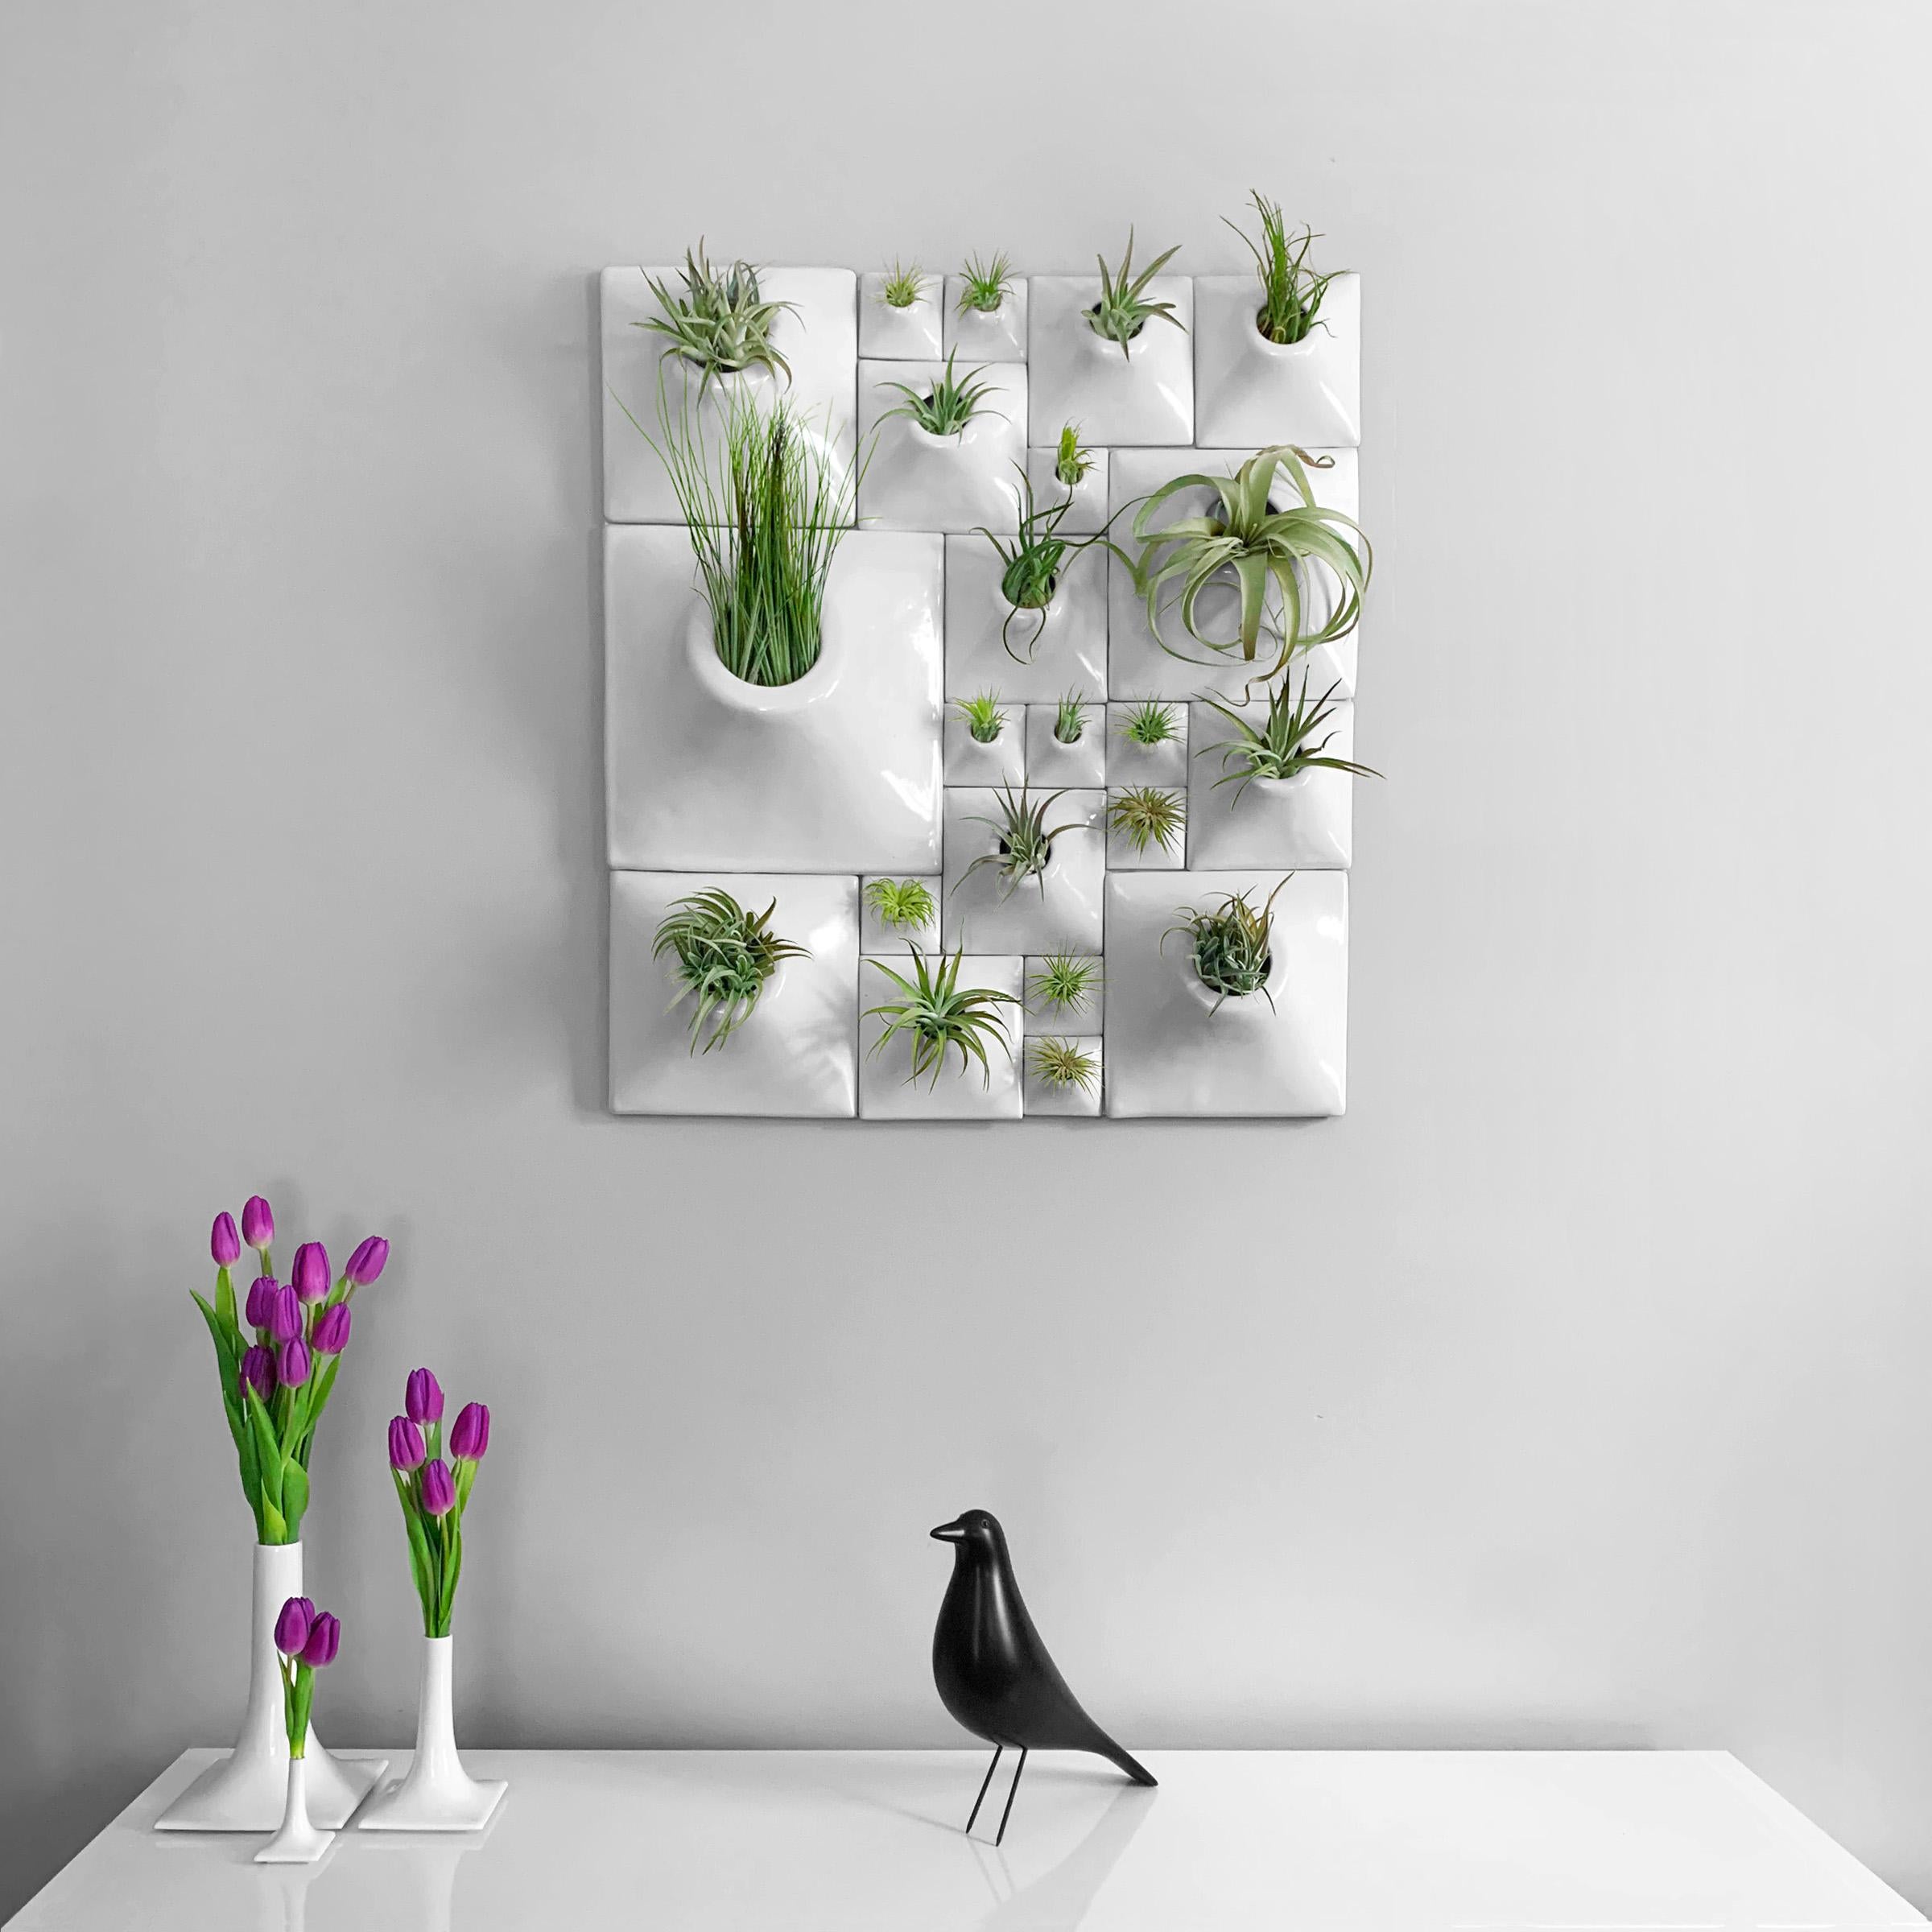 Modern Wall Sculpture, Biophilic Wall Art, Living Wall Decor, Moss Wall Planter

Transform your home or office decor into a modern epicenter of living wall art with this exciting configuration of Node Wall Planters.  Let your eyes wander over this